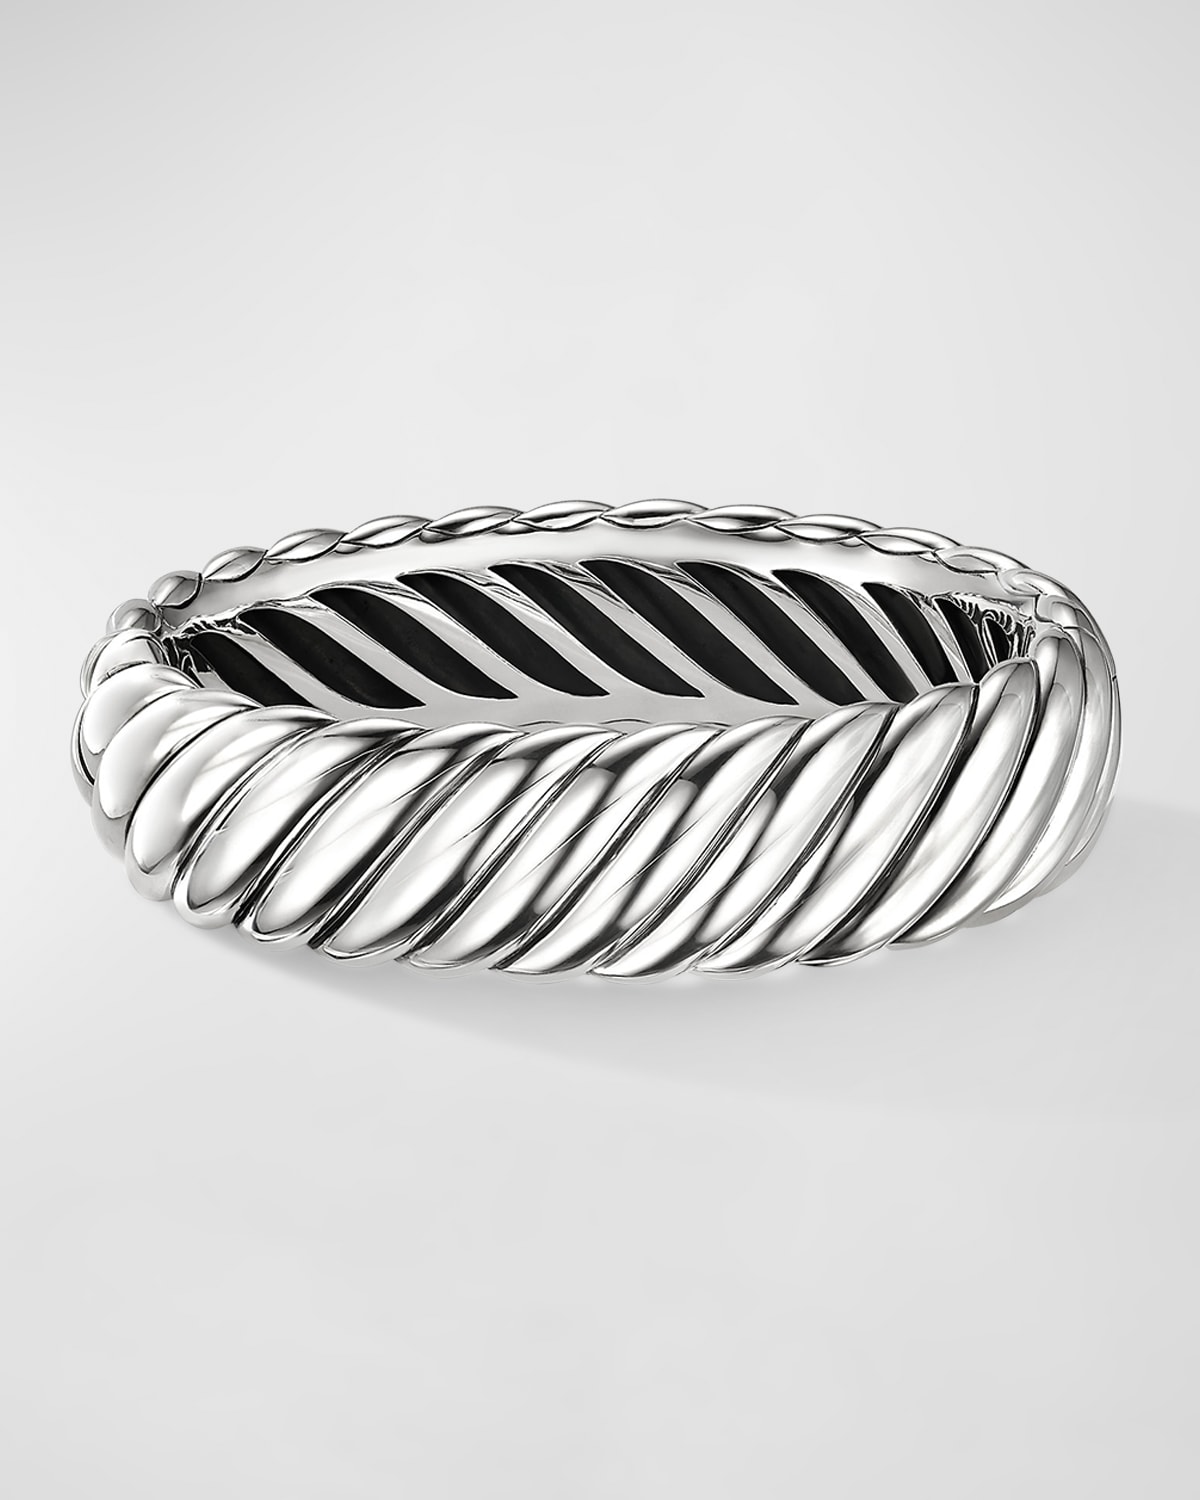 Sculpted Cable Bracelet in Silver, 17mm